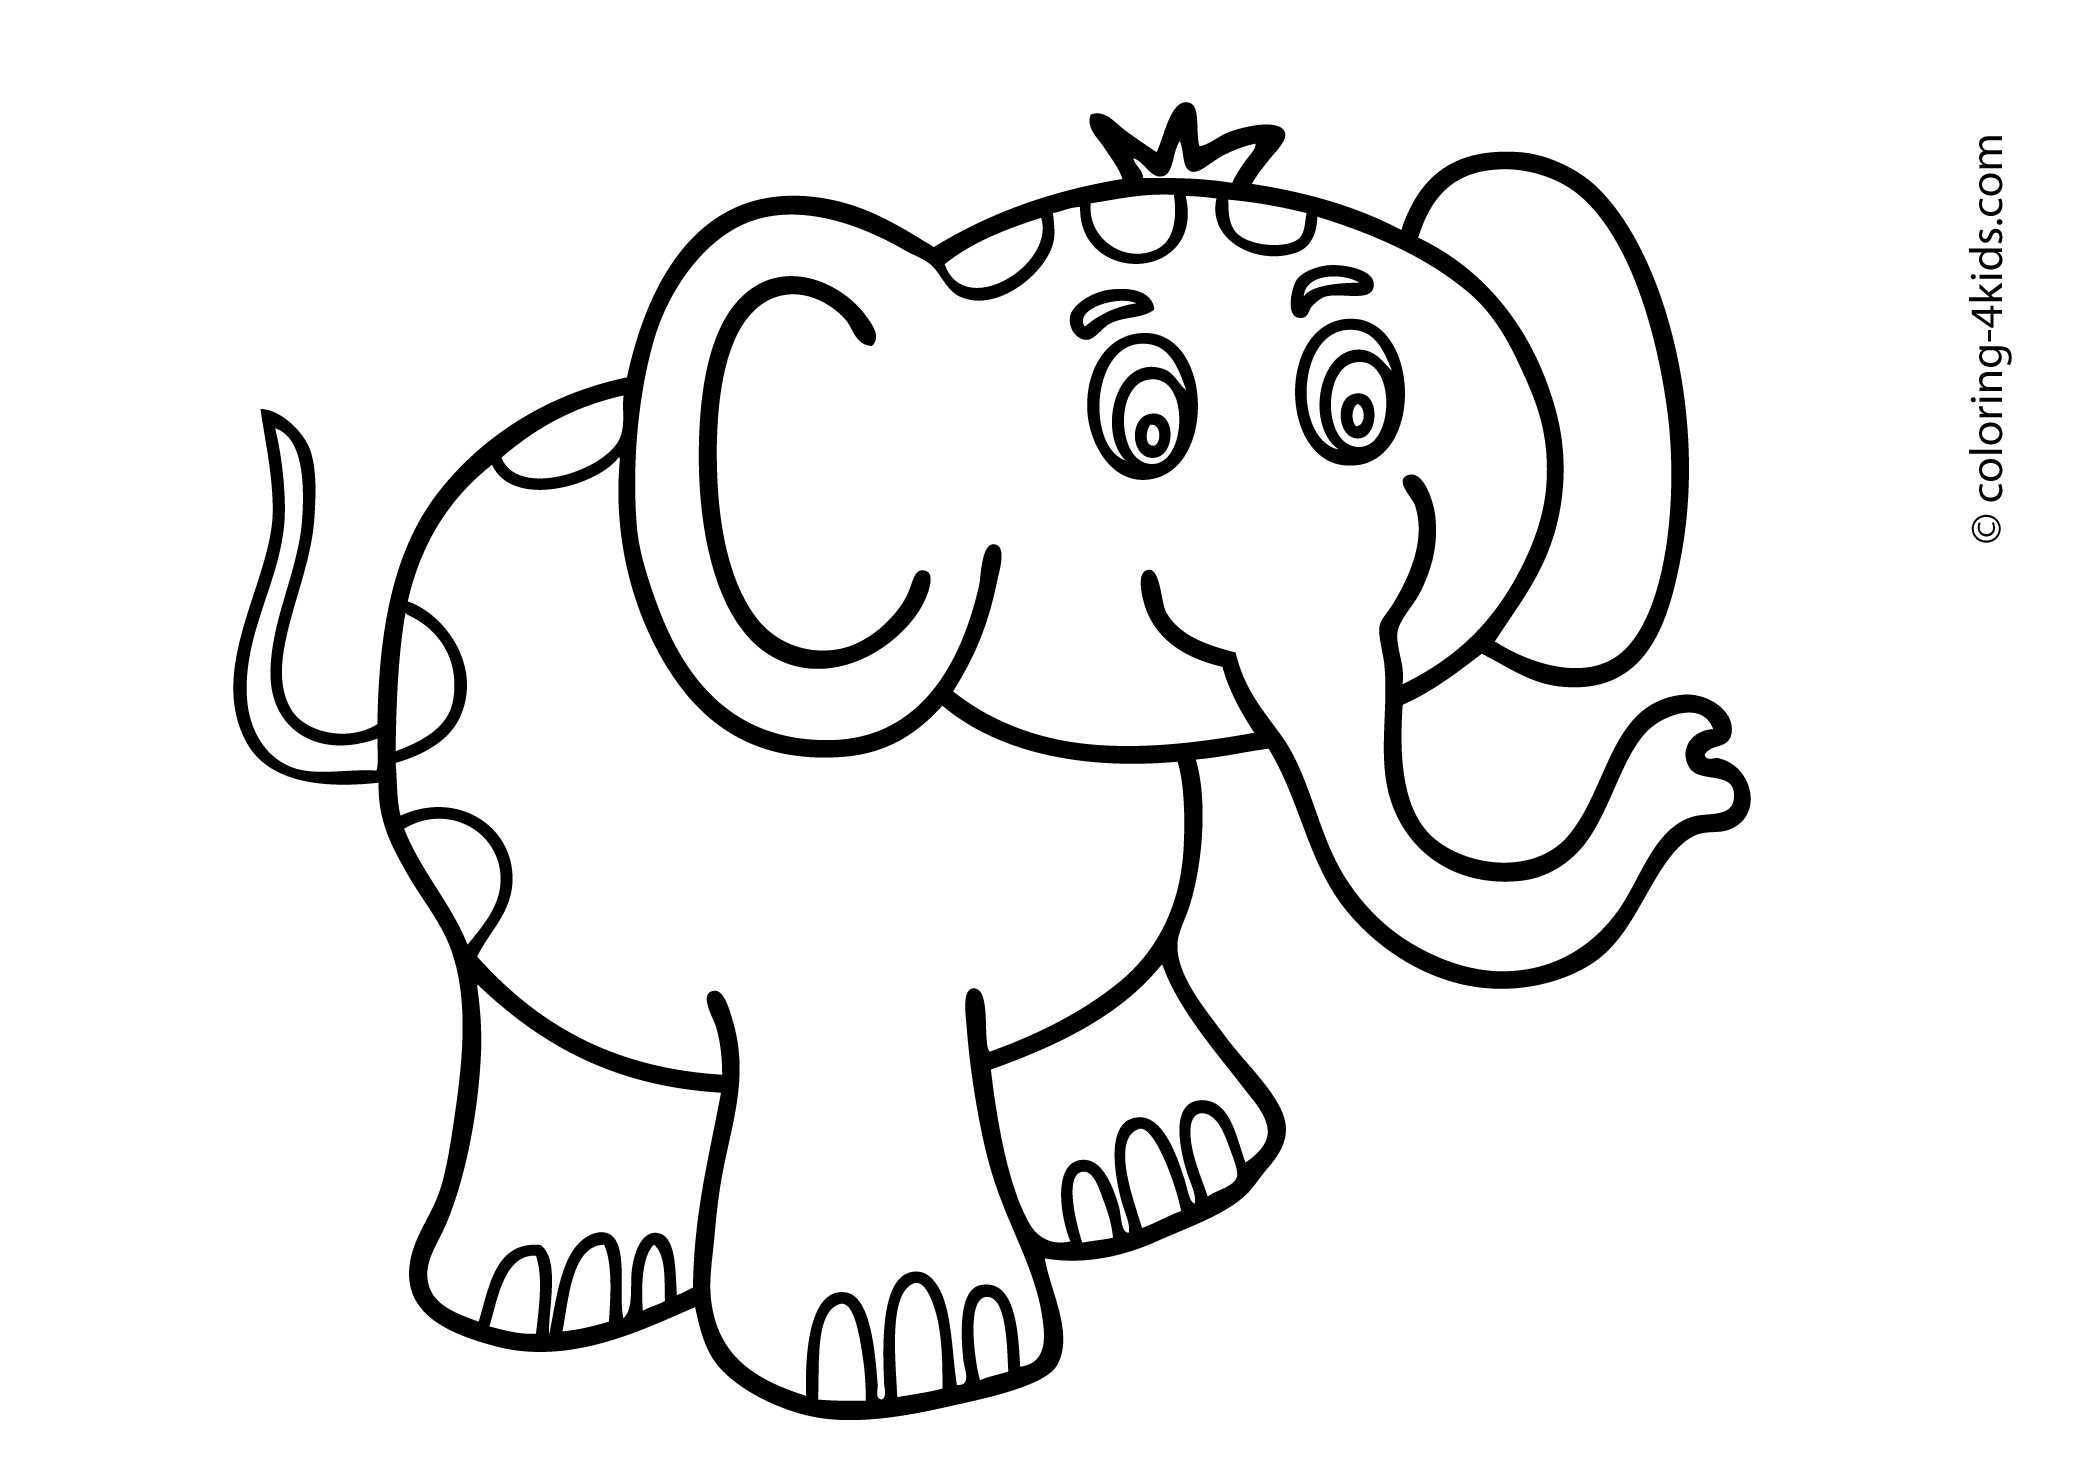 Free Printable Animal Coloring Pages For Children Image 49 ...